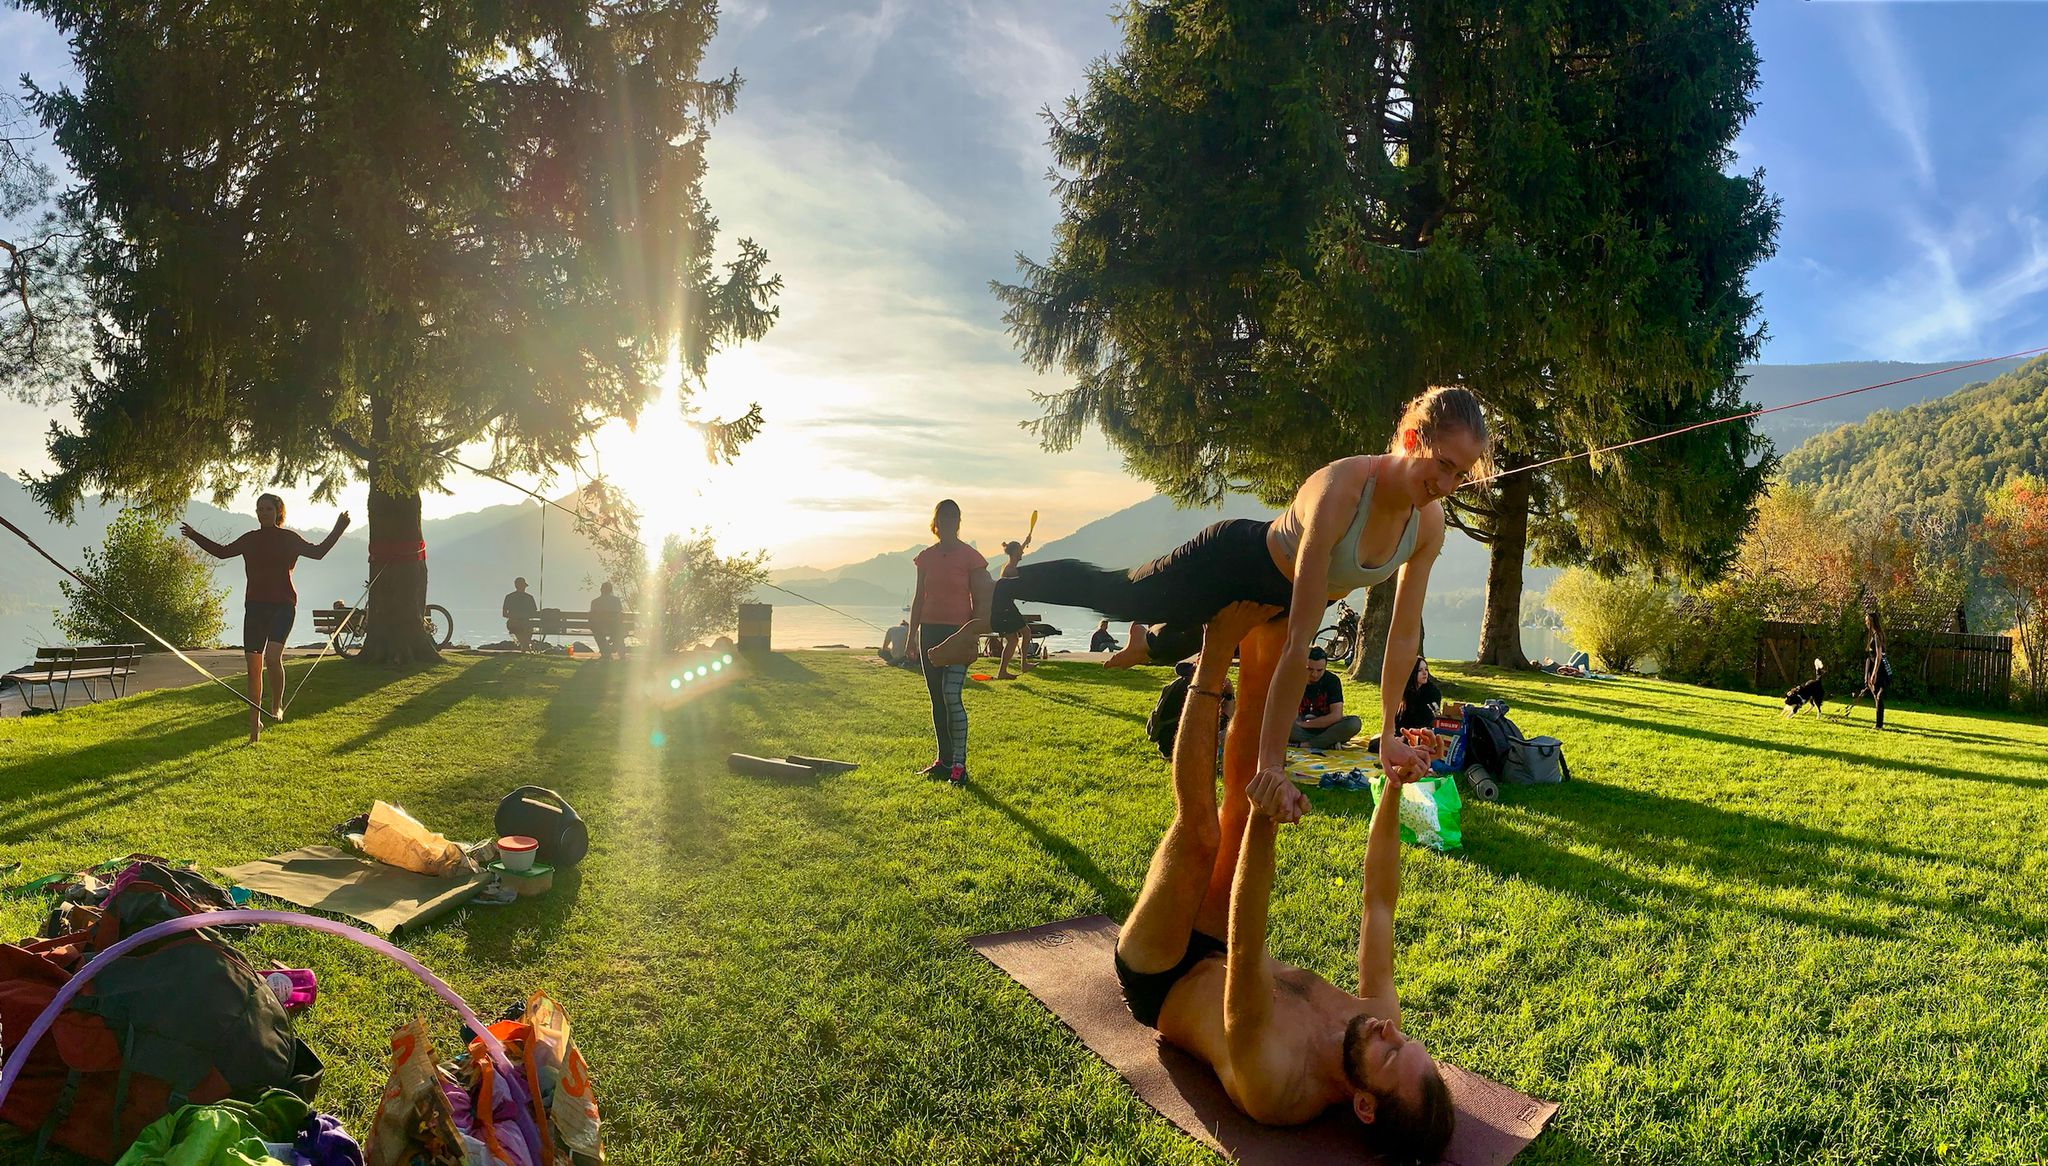 Two members of MOVE Interlaken enjoying AcroYoga in the sunset on the lake at the Kifferinseli